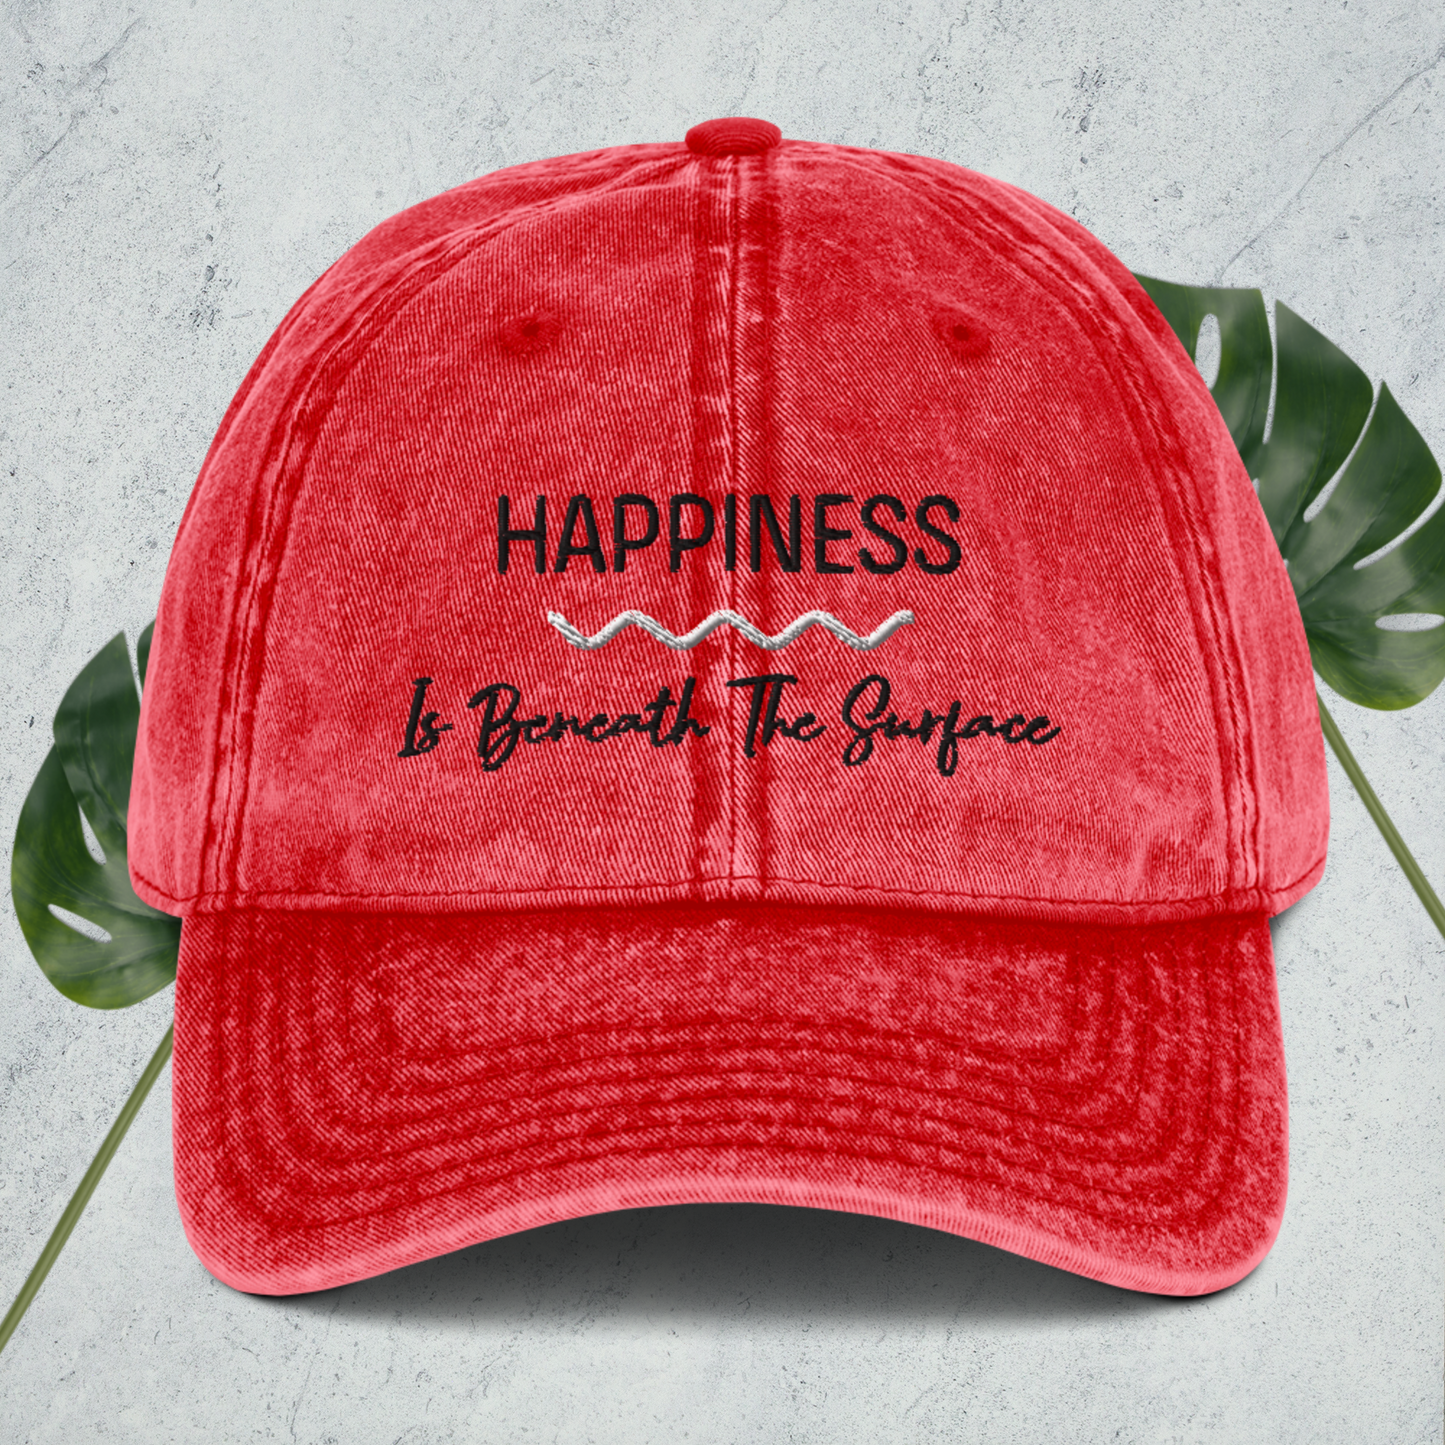 Happiness - Is Beneath The Surface Vintage Cotton Twill Cap